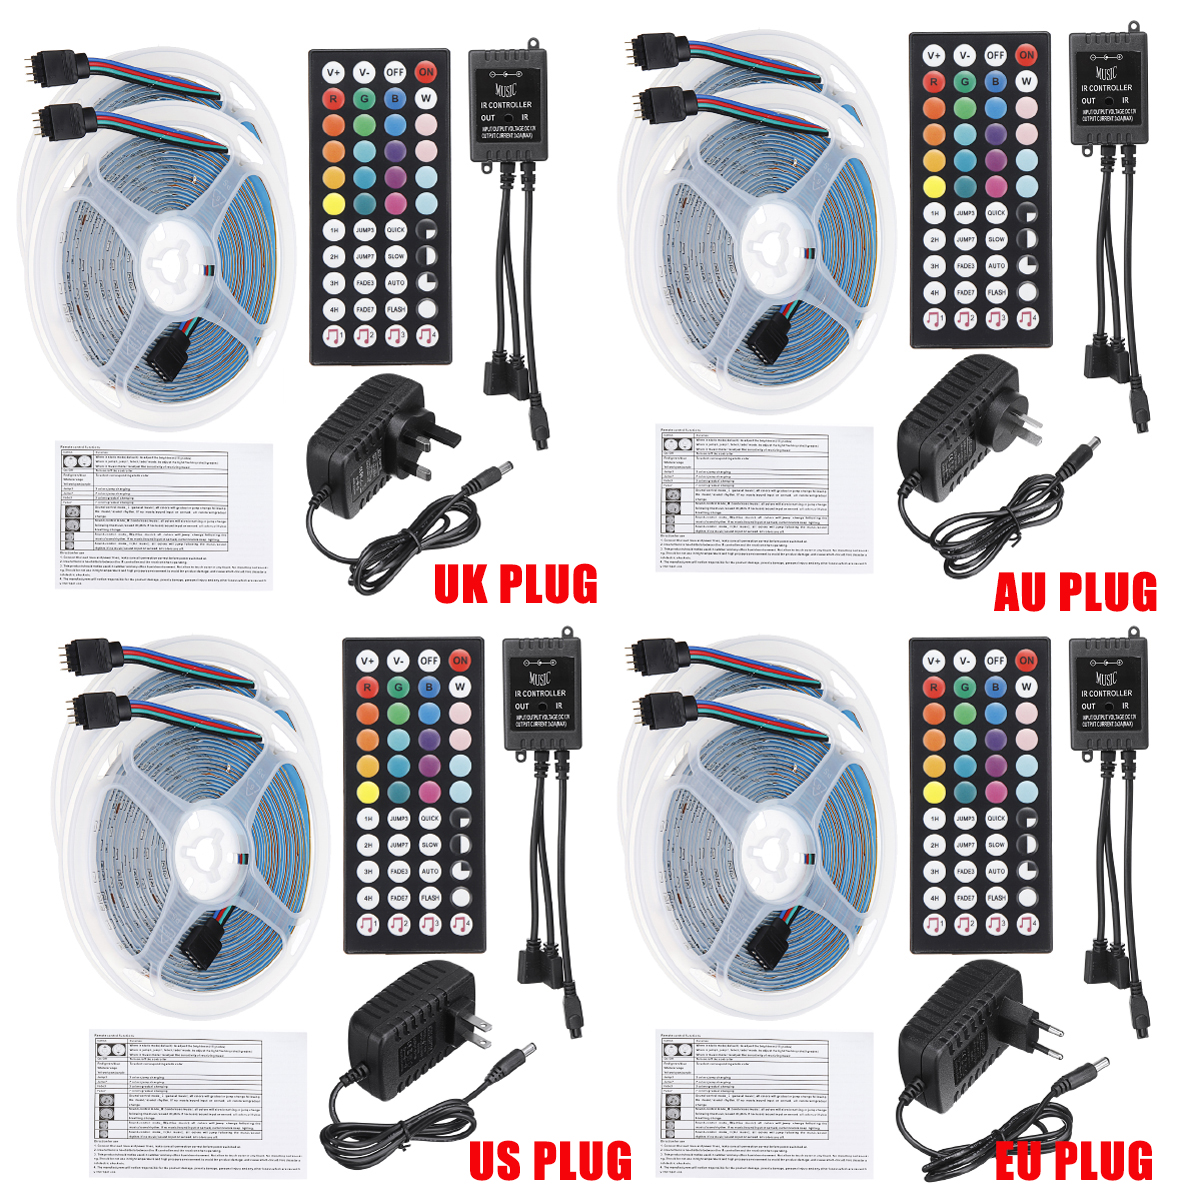 2x5M-Music-Sound-Activated-LED-Strip-Light-Waterproof-3528-RGB-Tape-Under-Cabinet-Kitchen-Lamp-Set---1730238-5